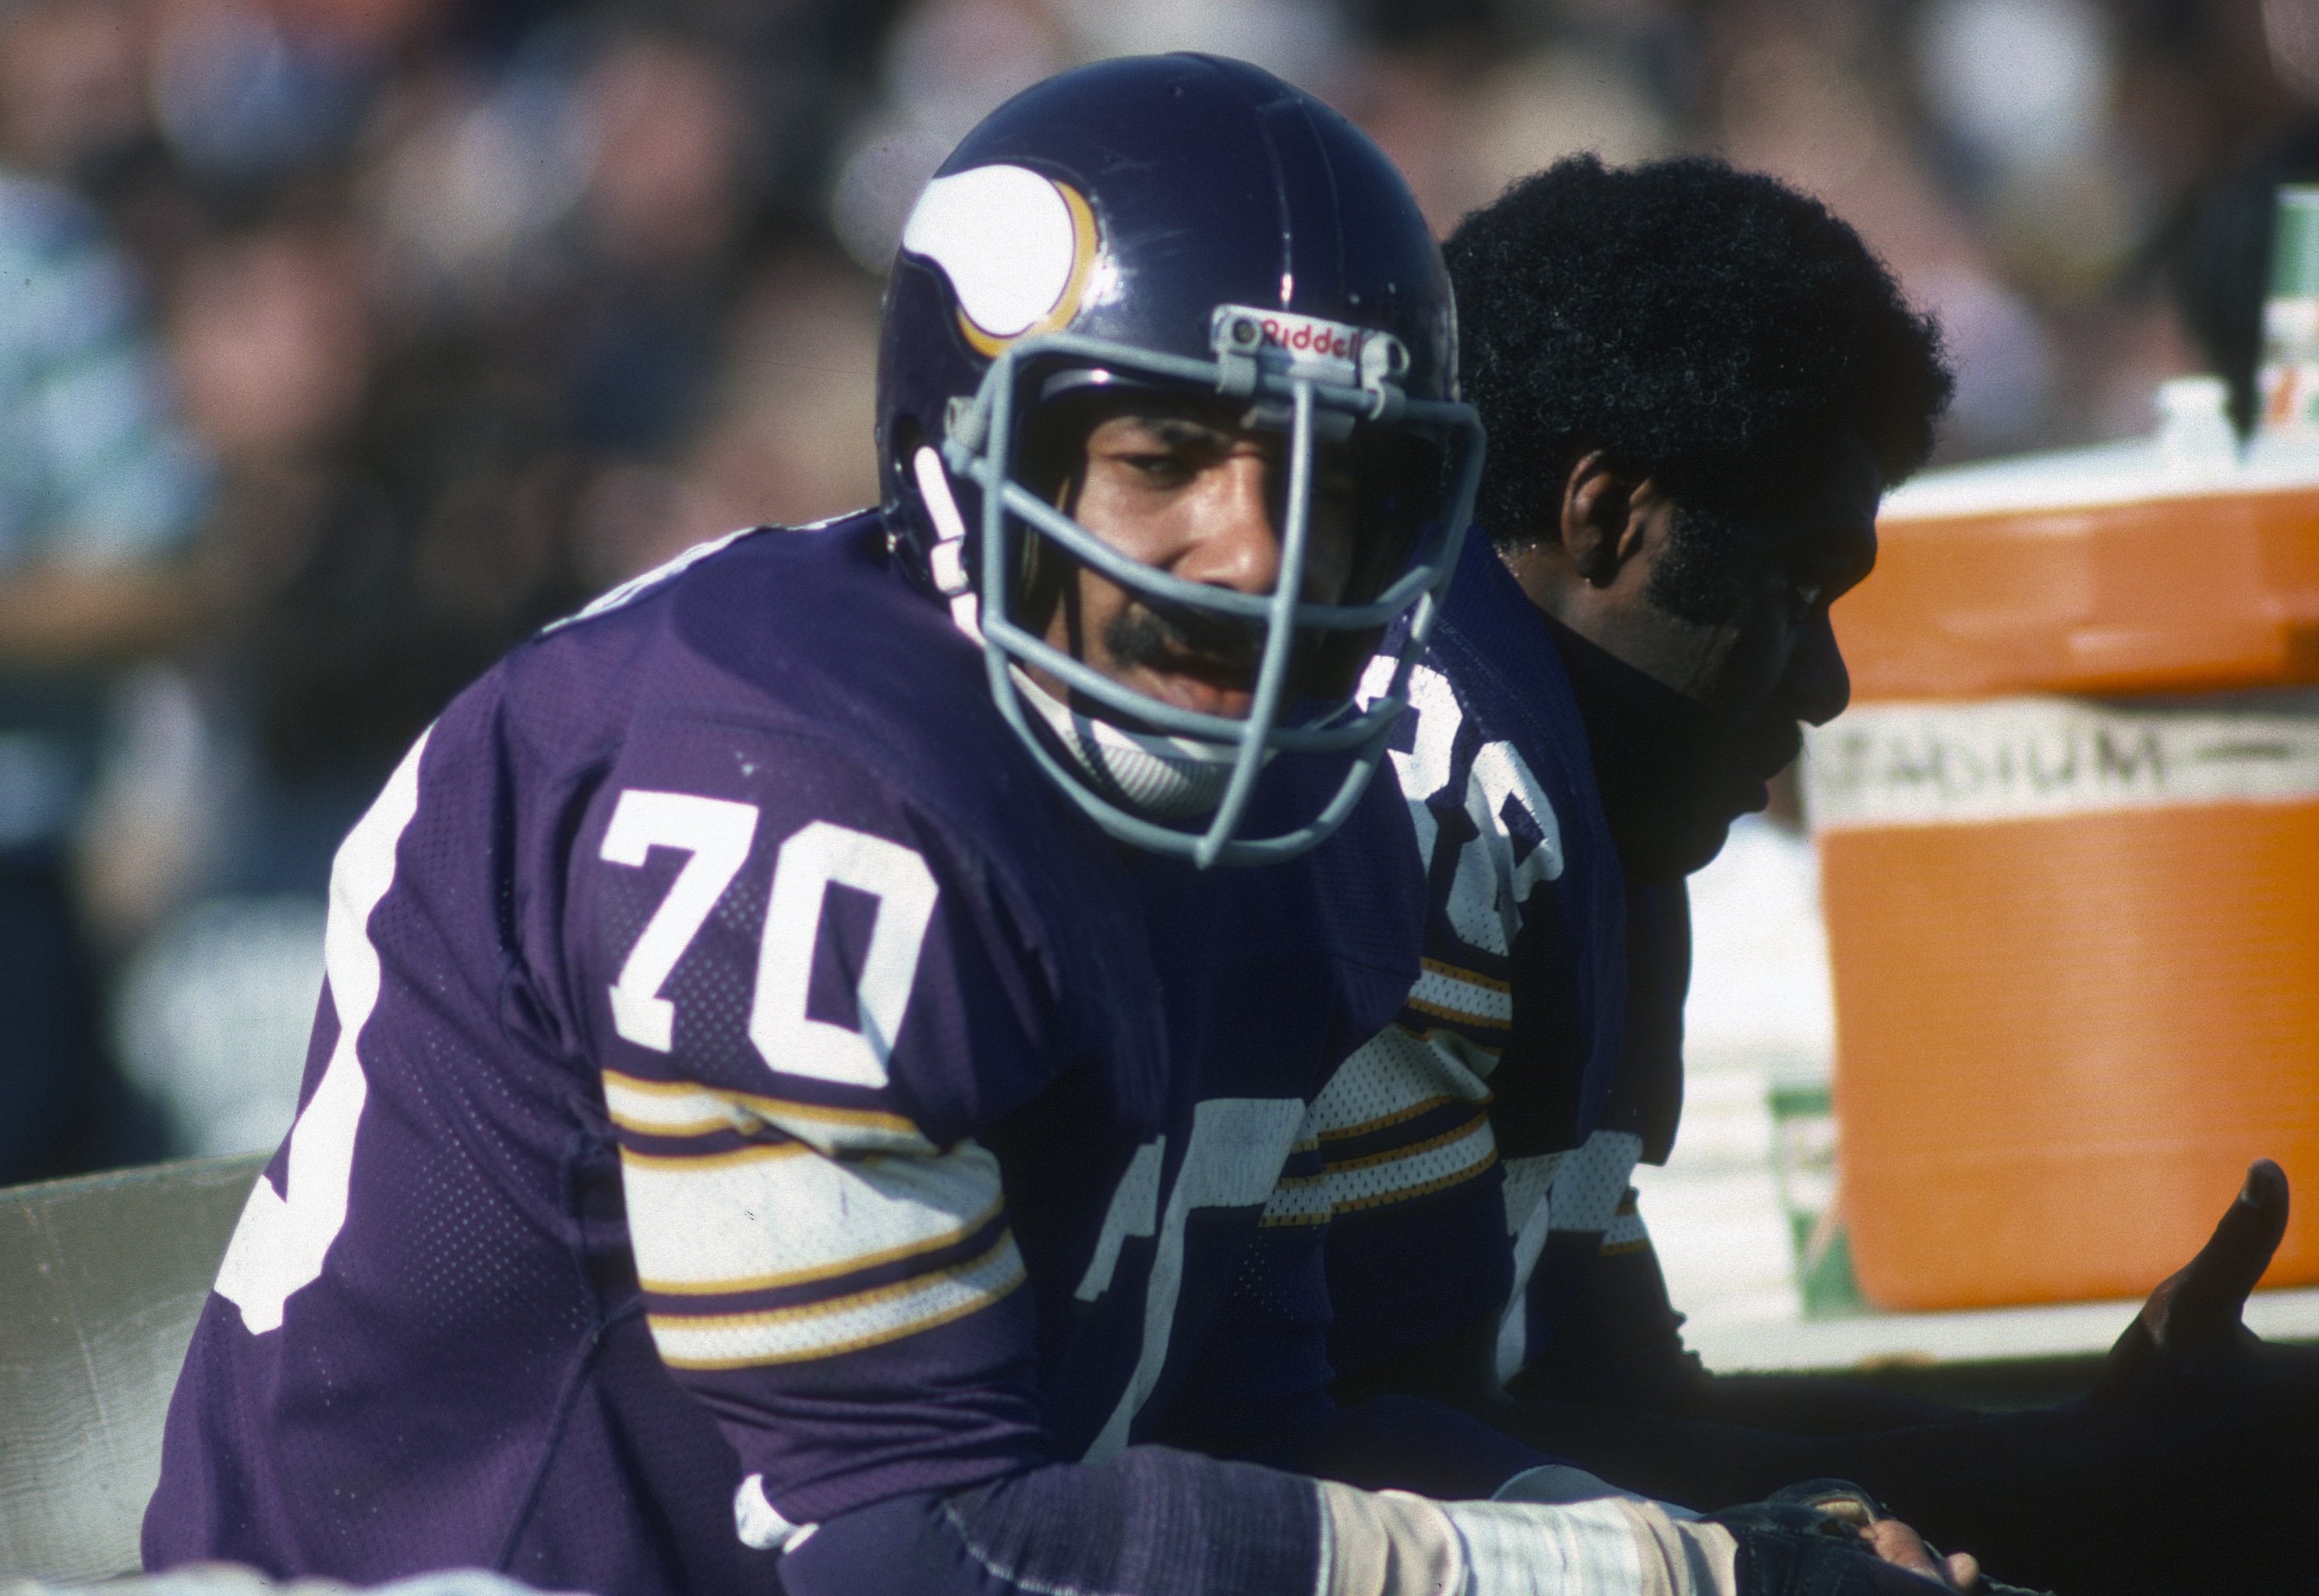 NFL to name Deacon Jones Award for most sacks - Behind the Steel Curtain